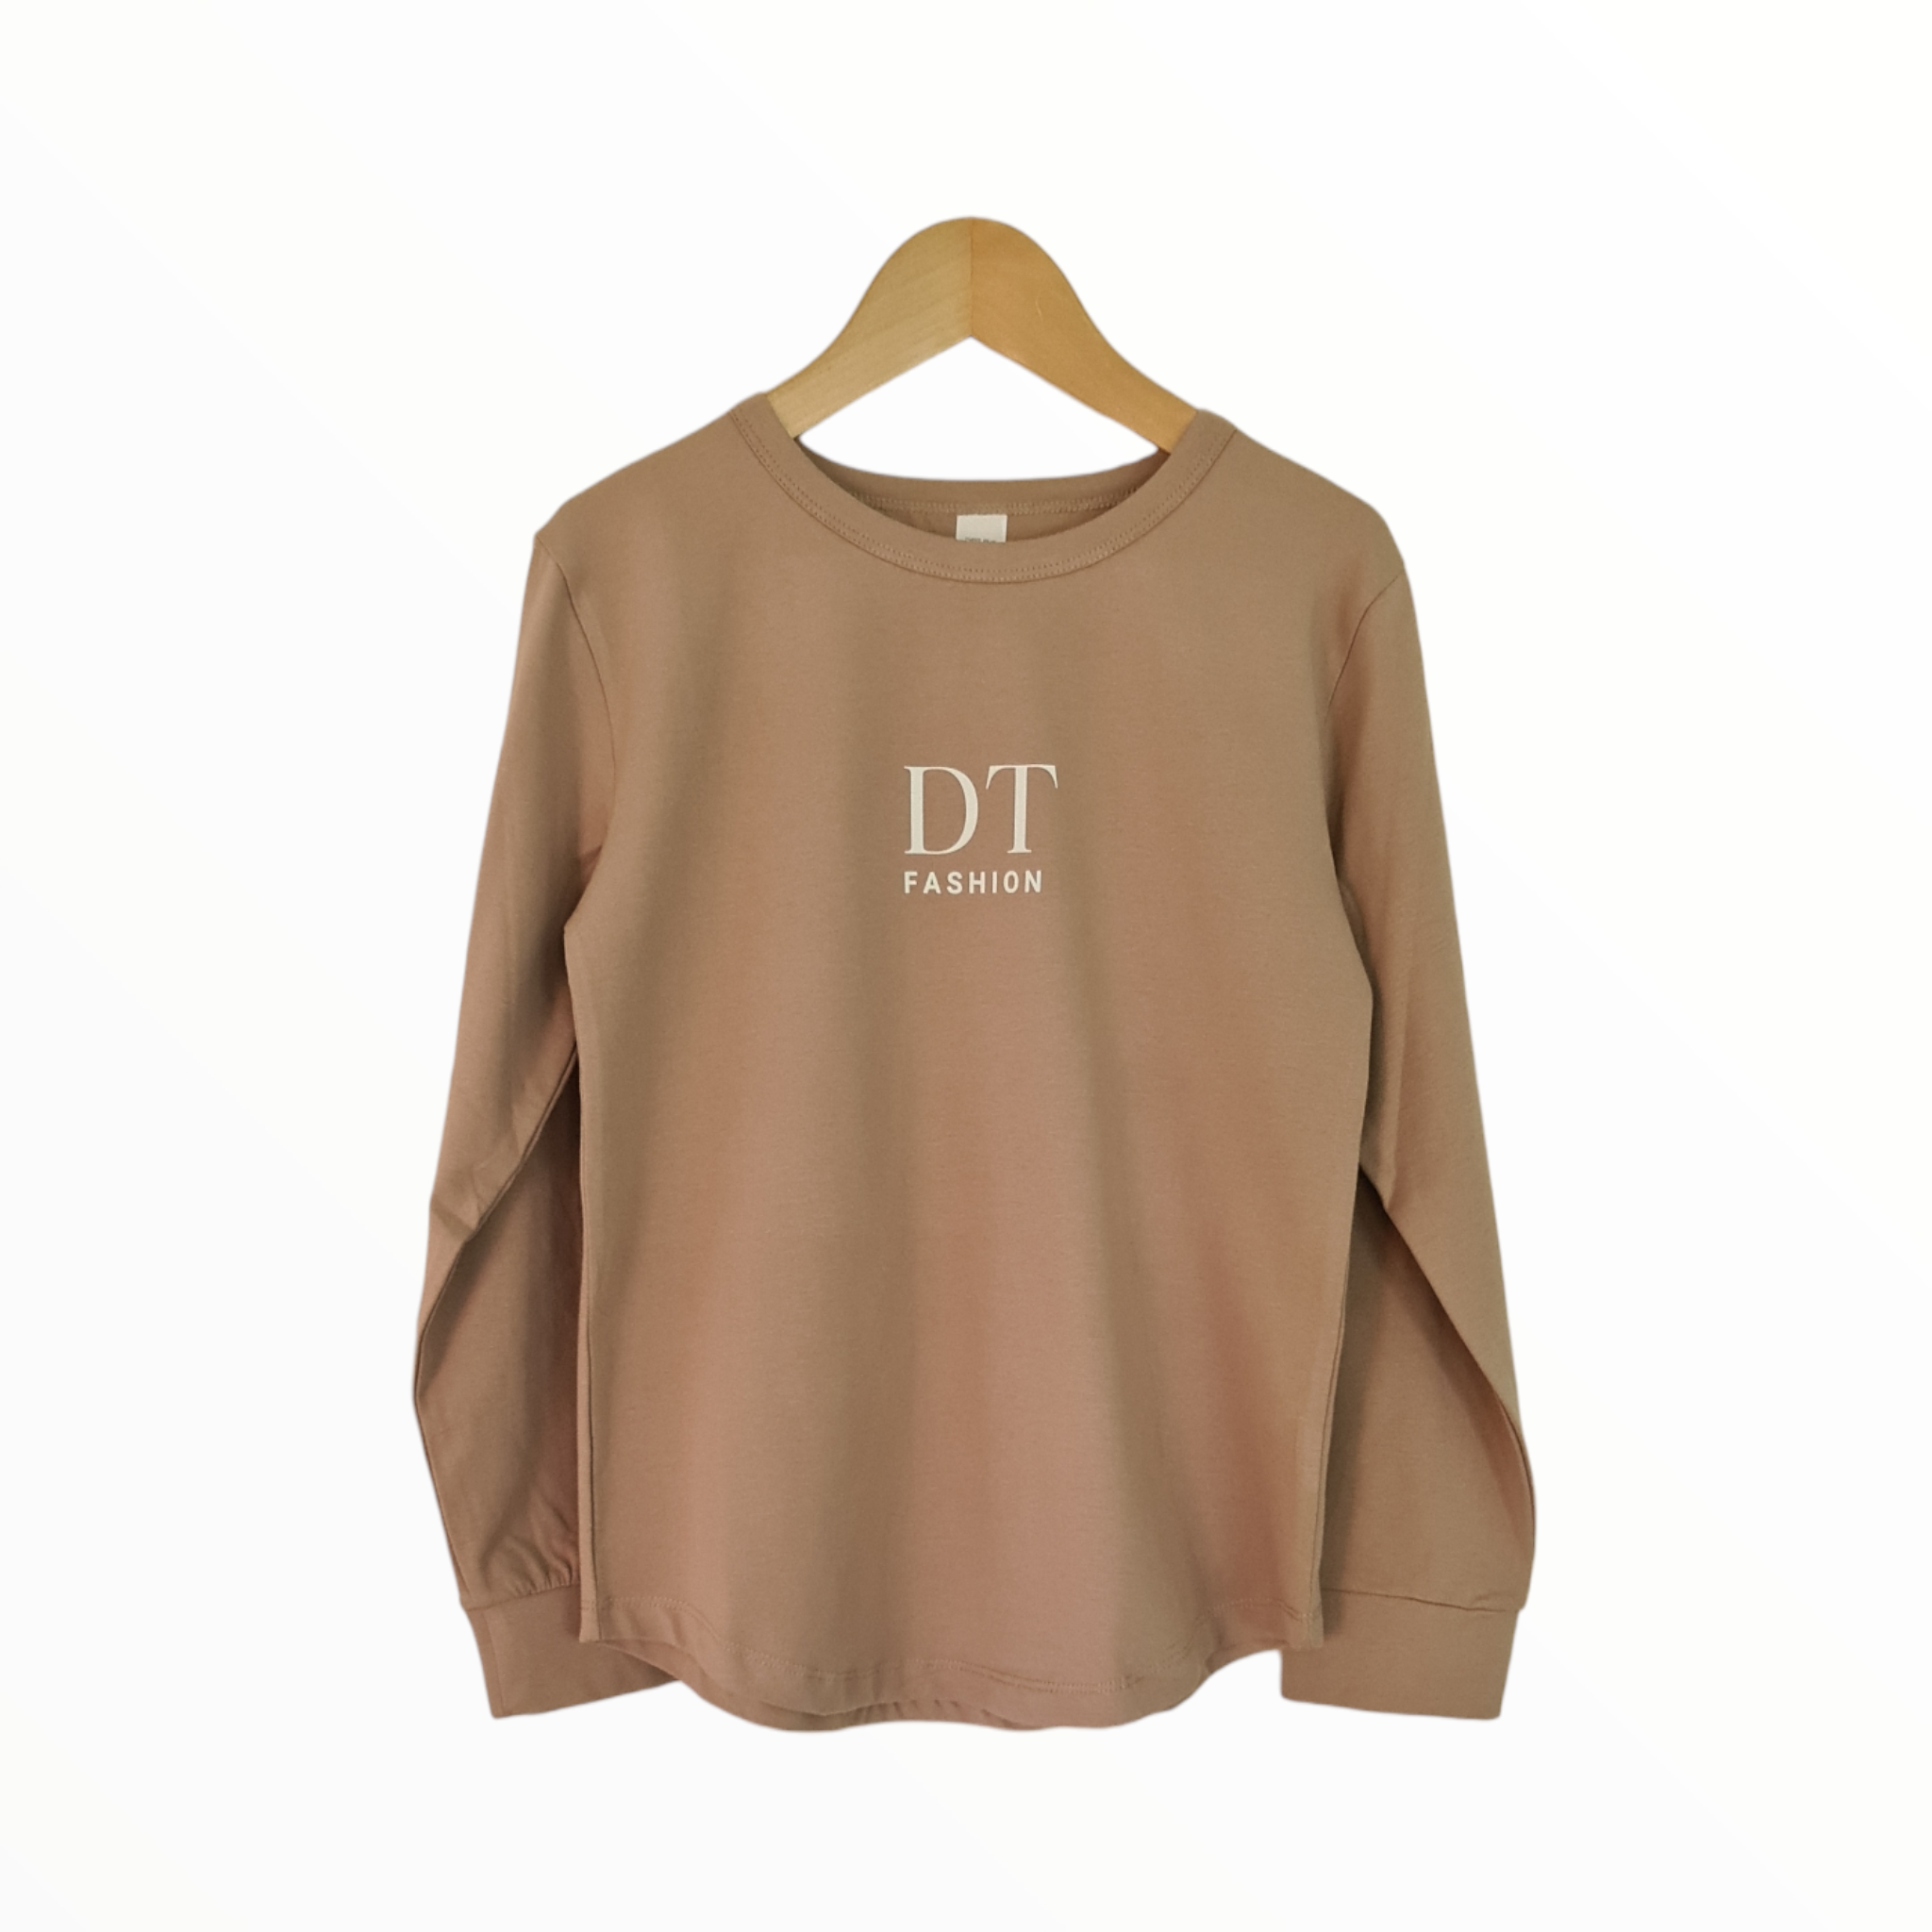 DT Fashion Long Sleeve Top - Clay